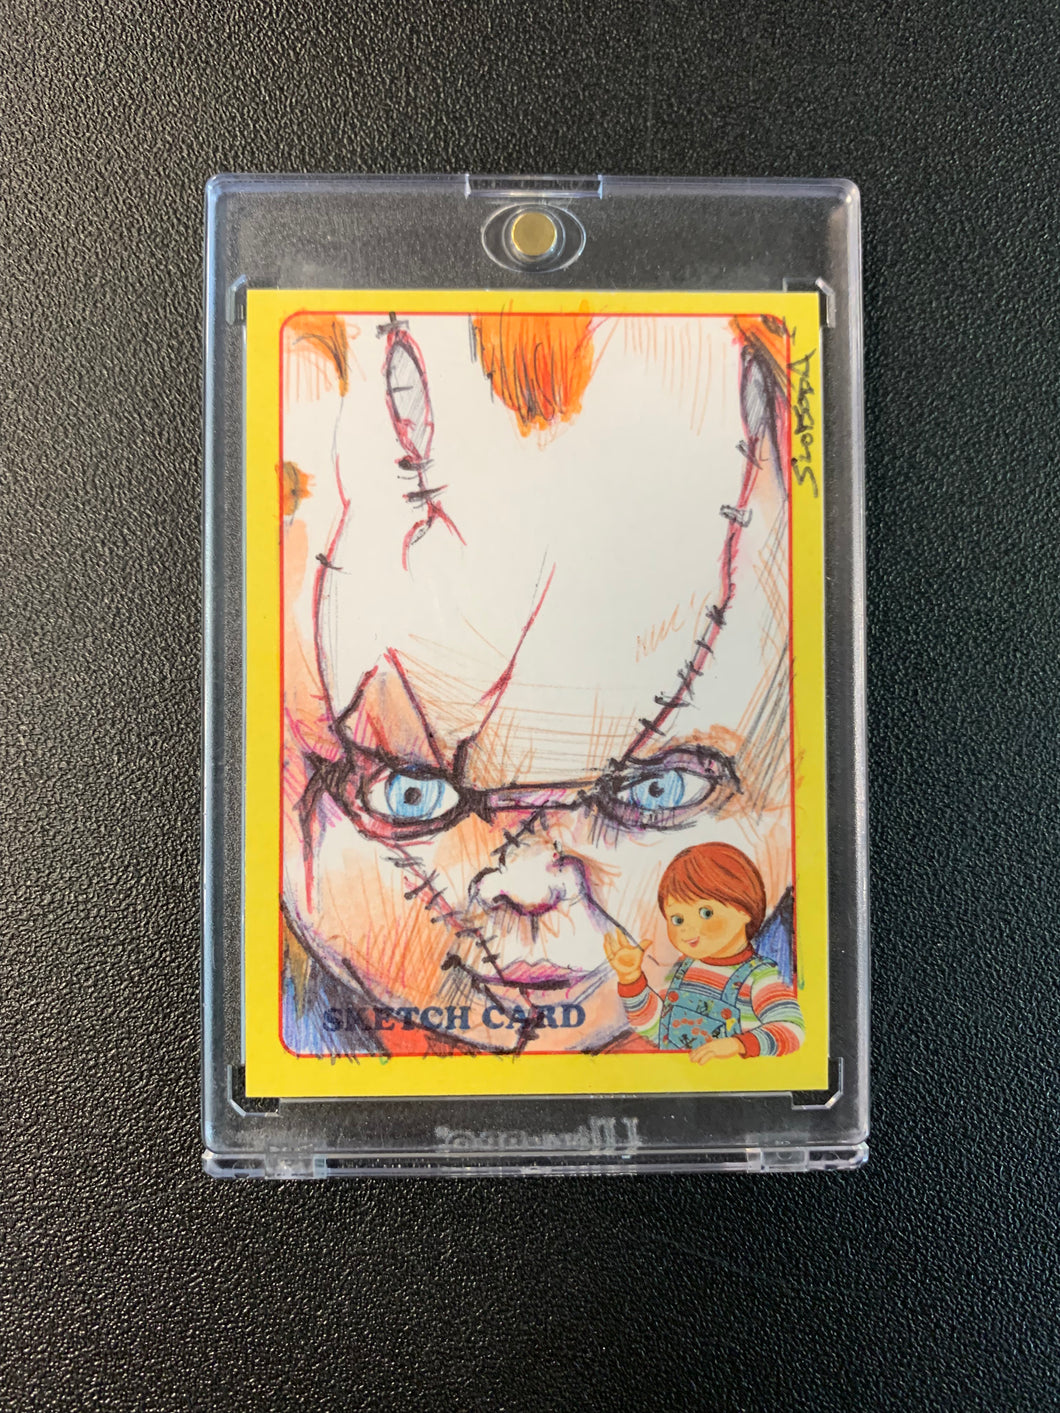 CHUCKY STITCHES CHILDS PLAY ARTIST PROOF SKETCH CARD IN PROTECTIVE CASE